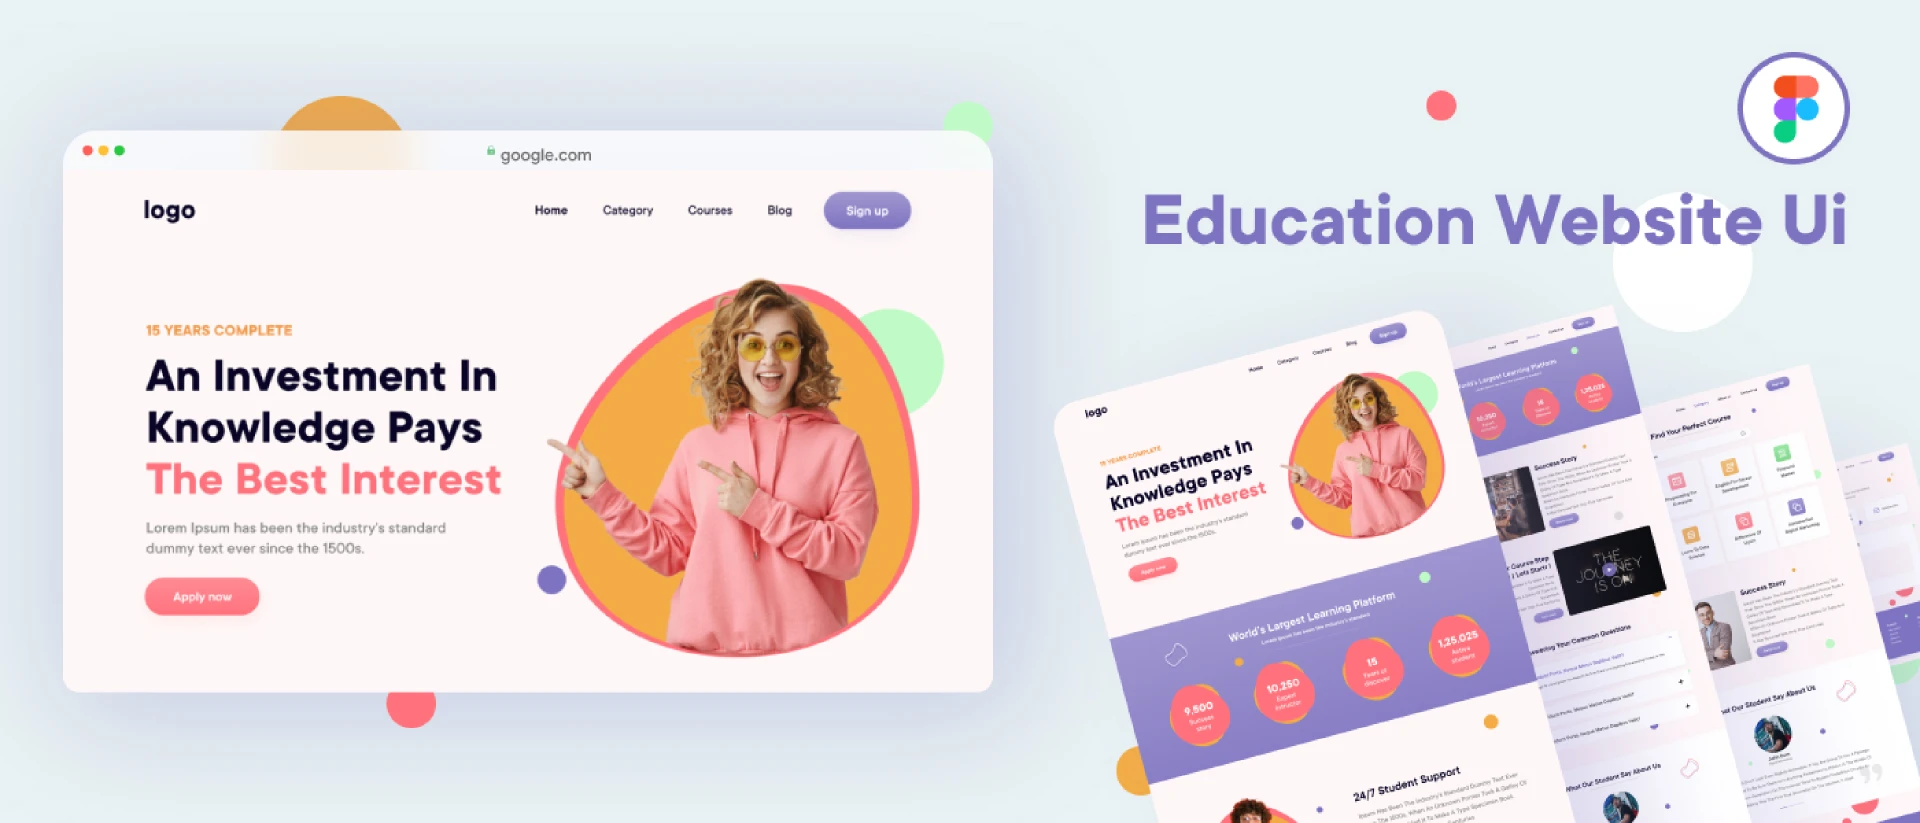 Education Website UI for Figma and Adobe XD